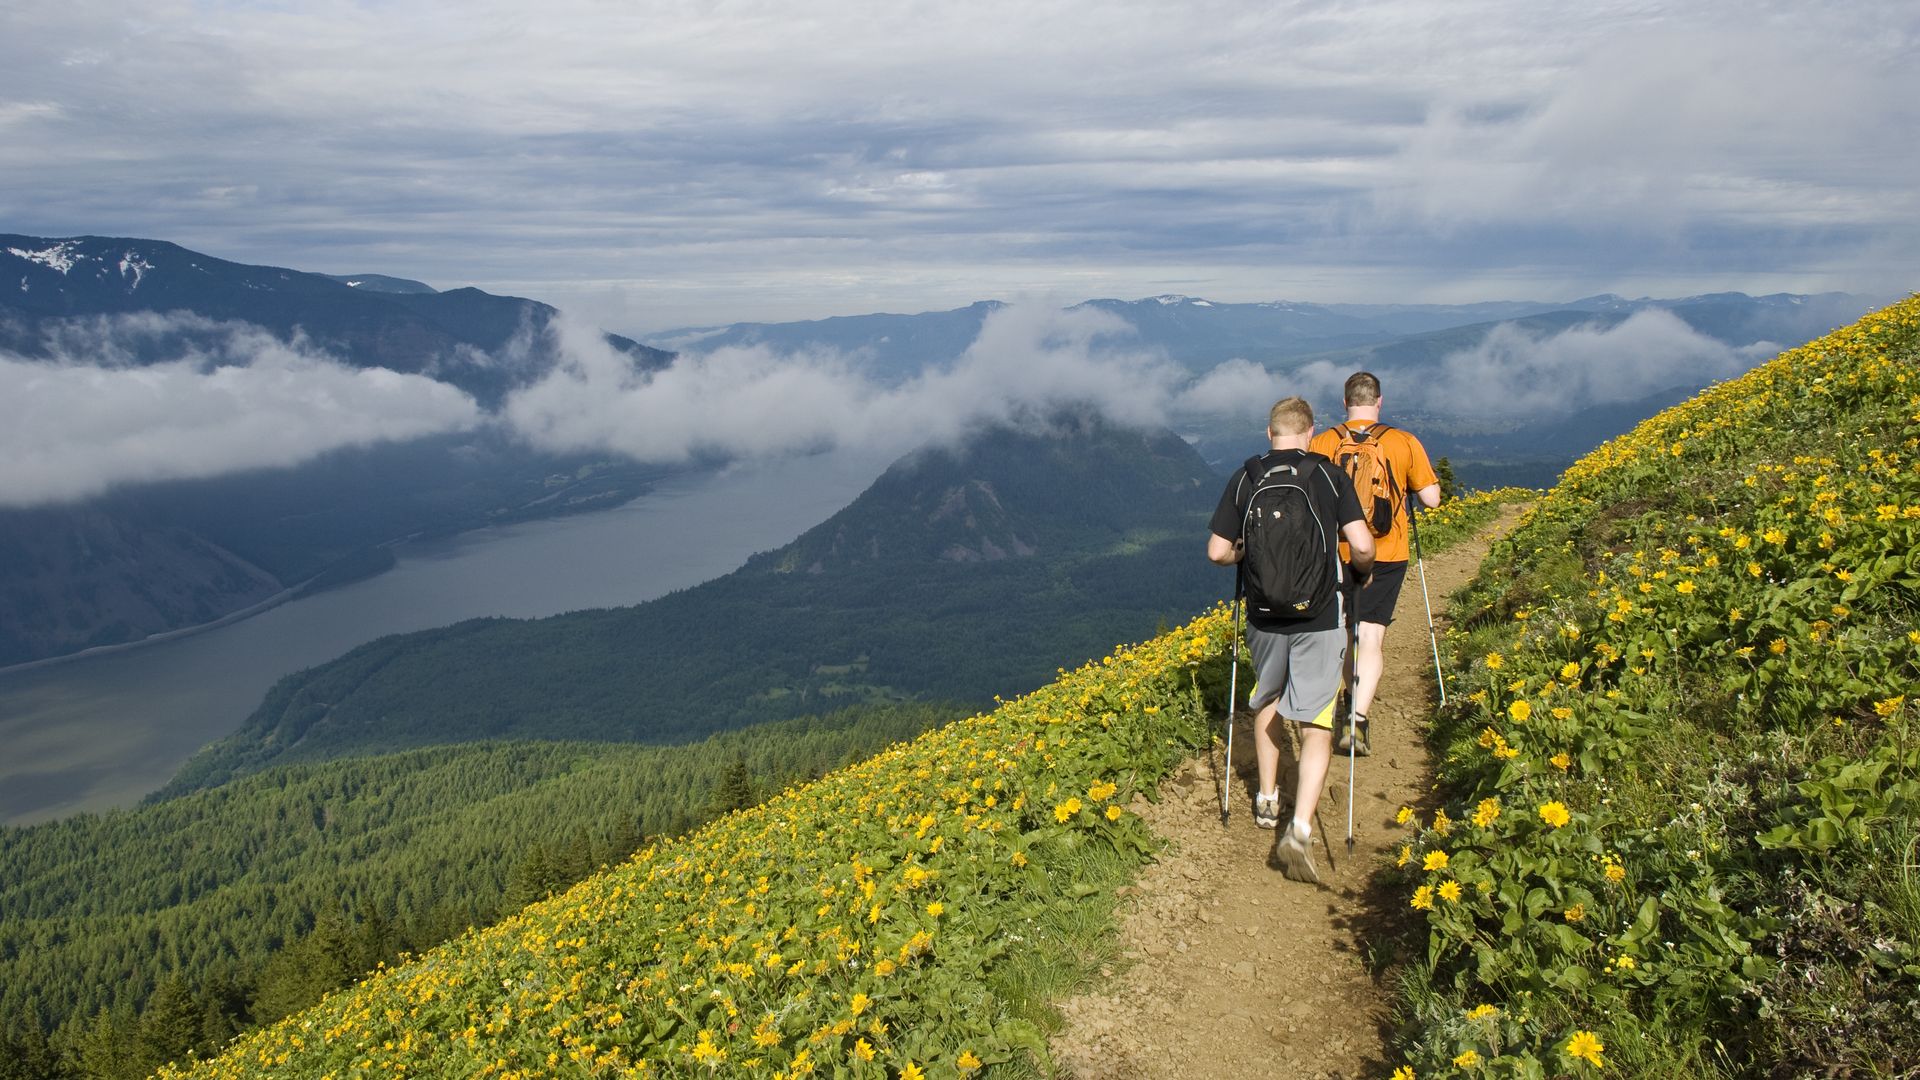 Two hikers walk along a dirt path along a hillside covered in yellow and orange wildflowers. In the distance there's a river cutting through with clouds hanging above.